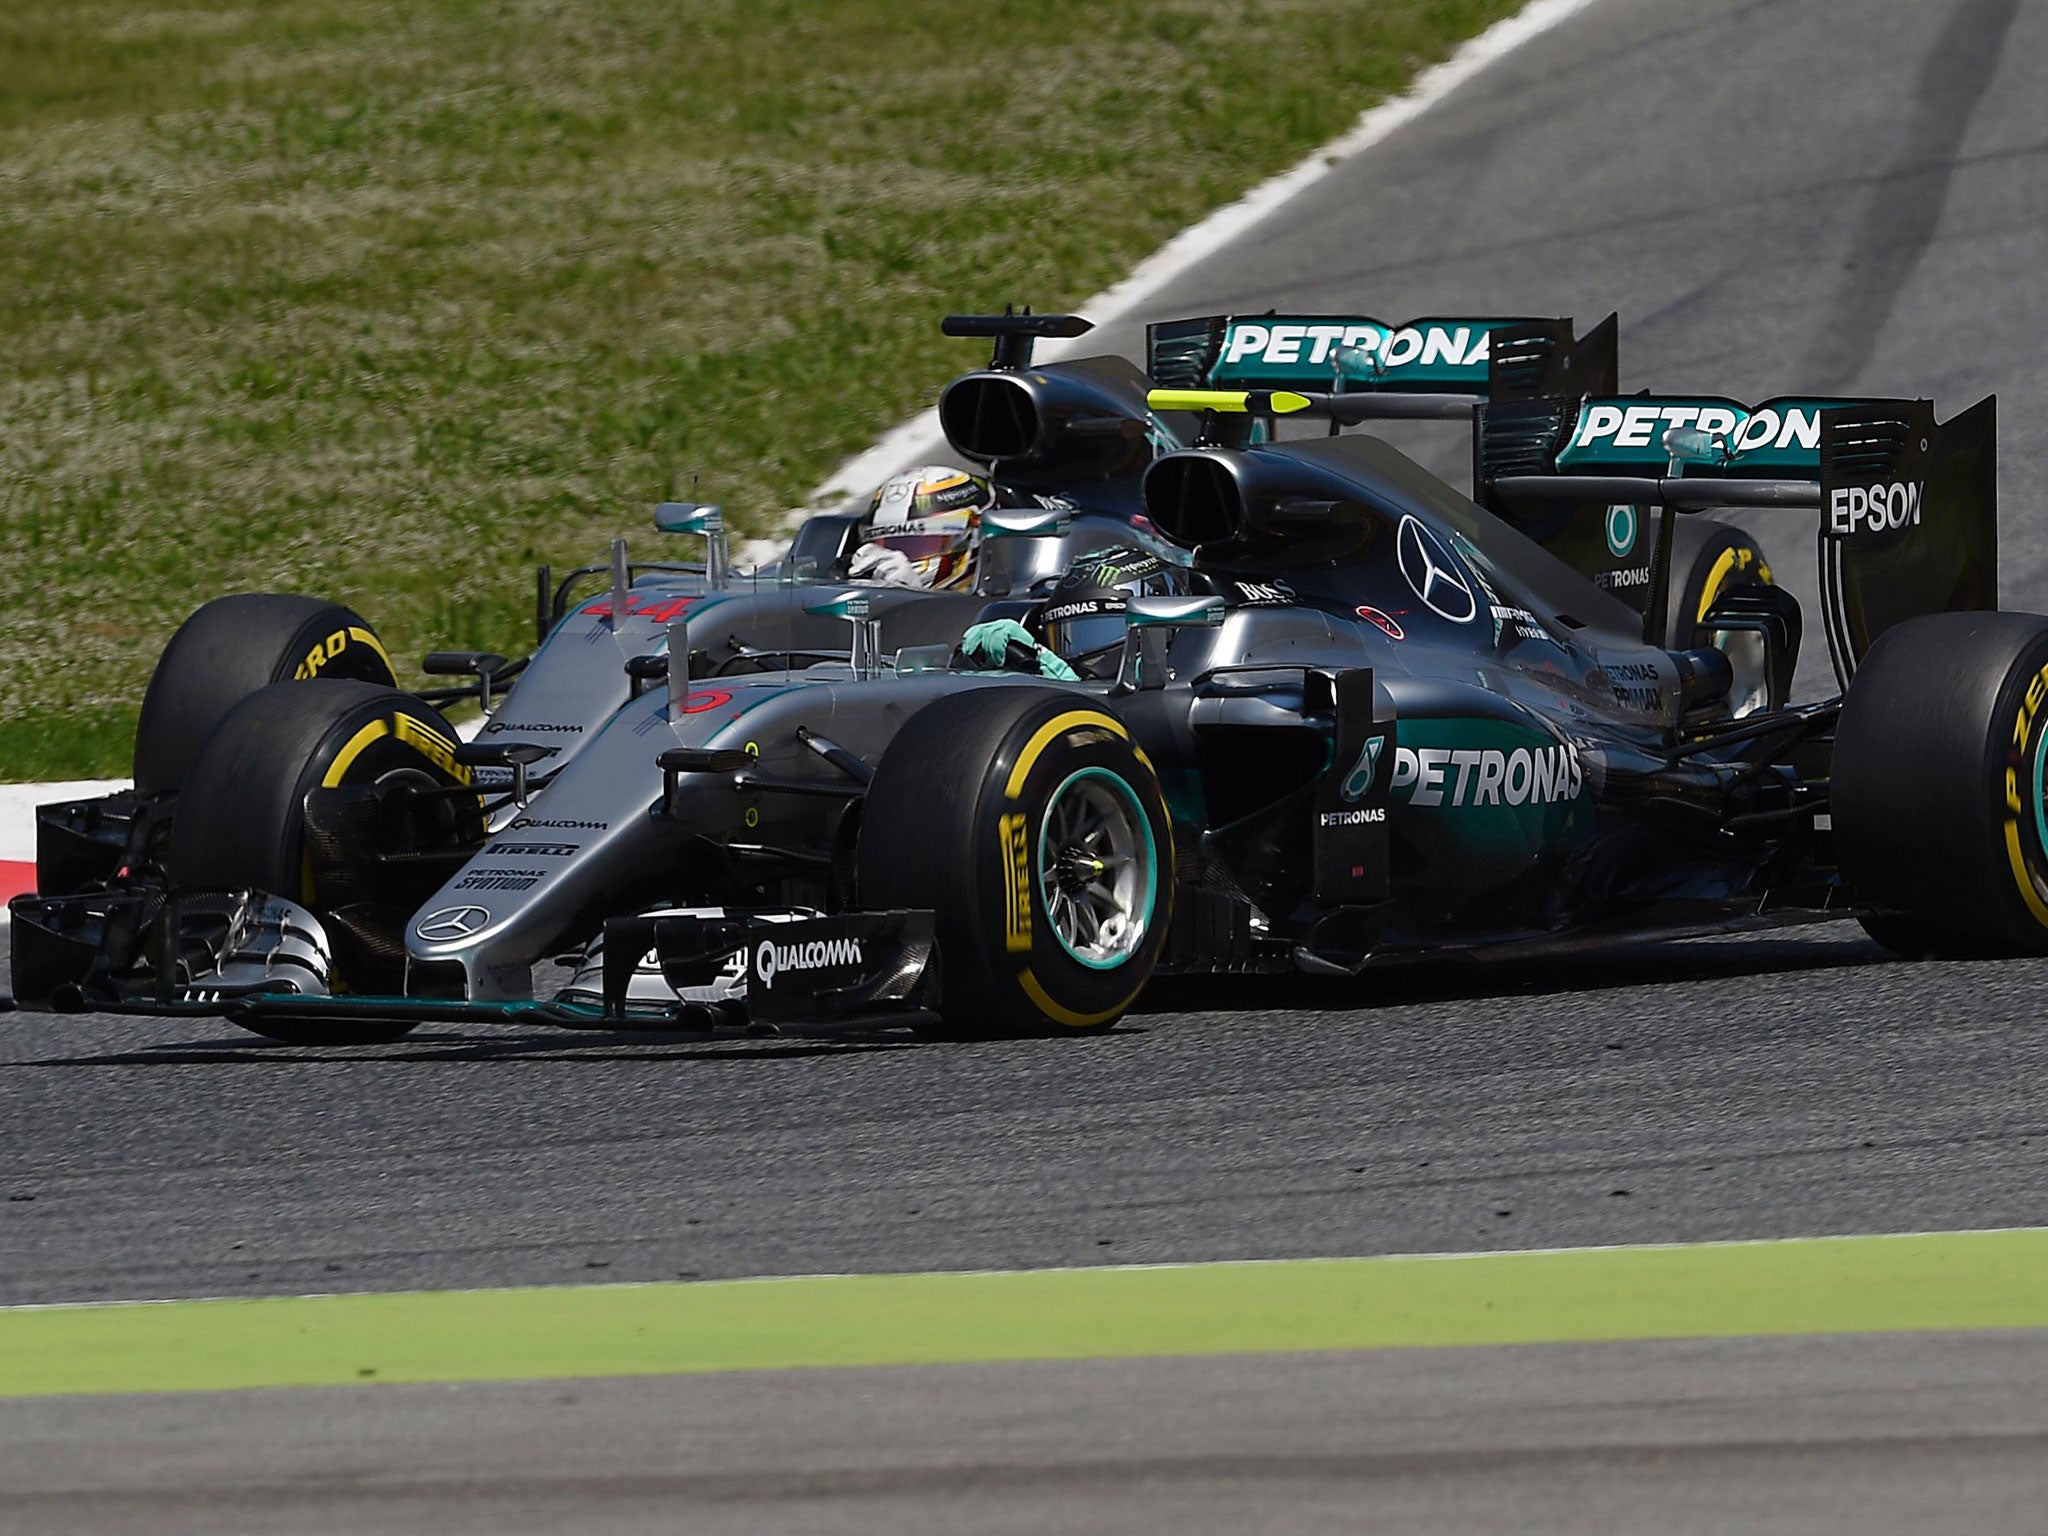 Hamilton and Rosberg vie for position on the first lap of the Spanish Grand Prix